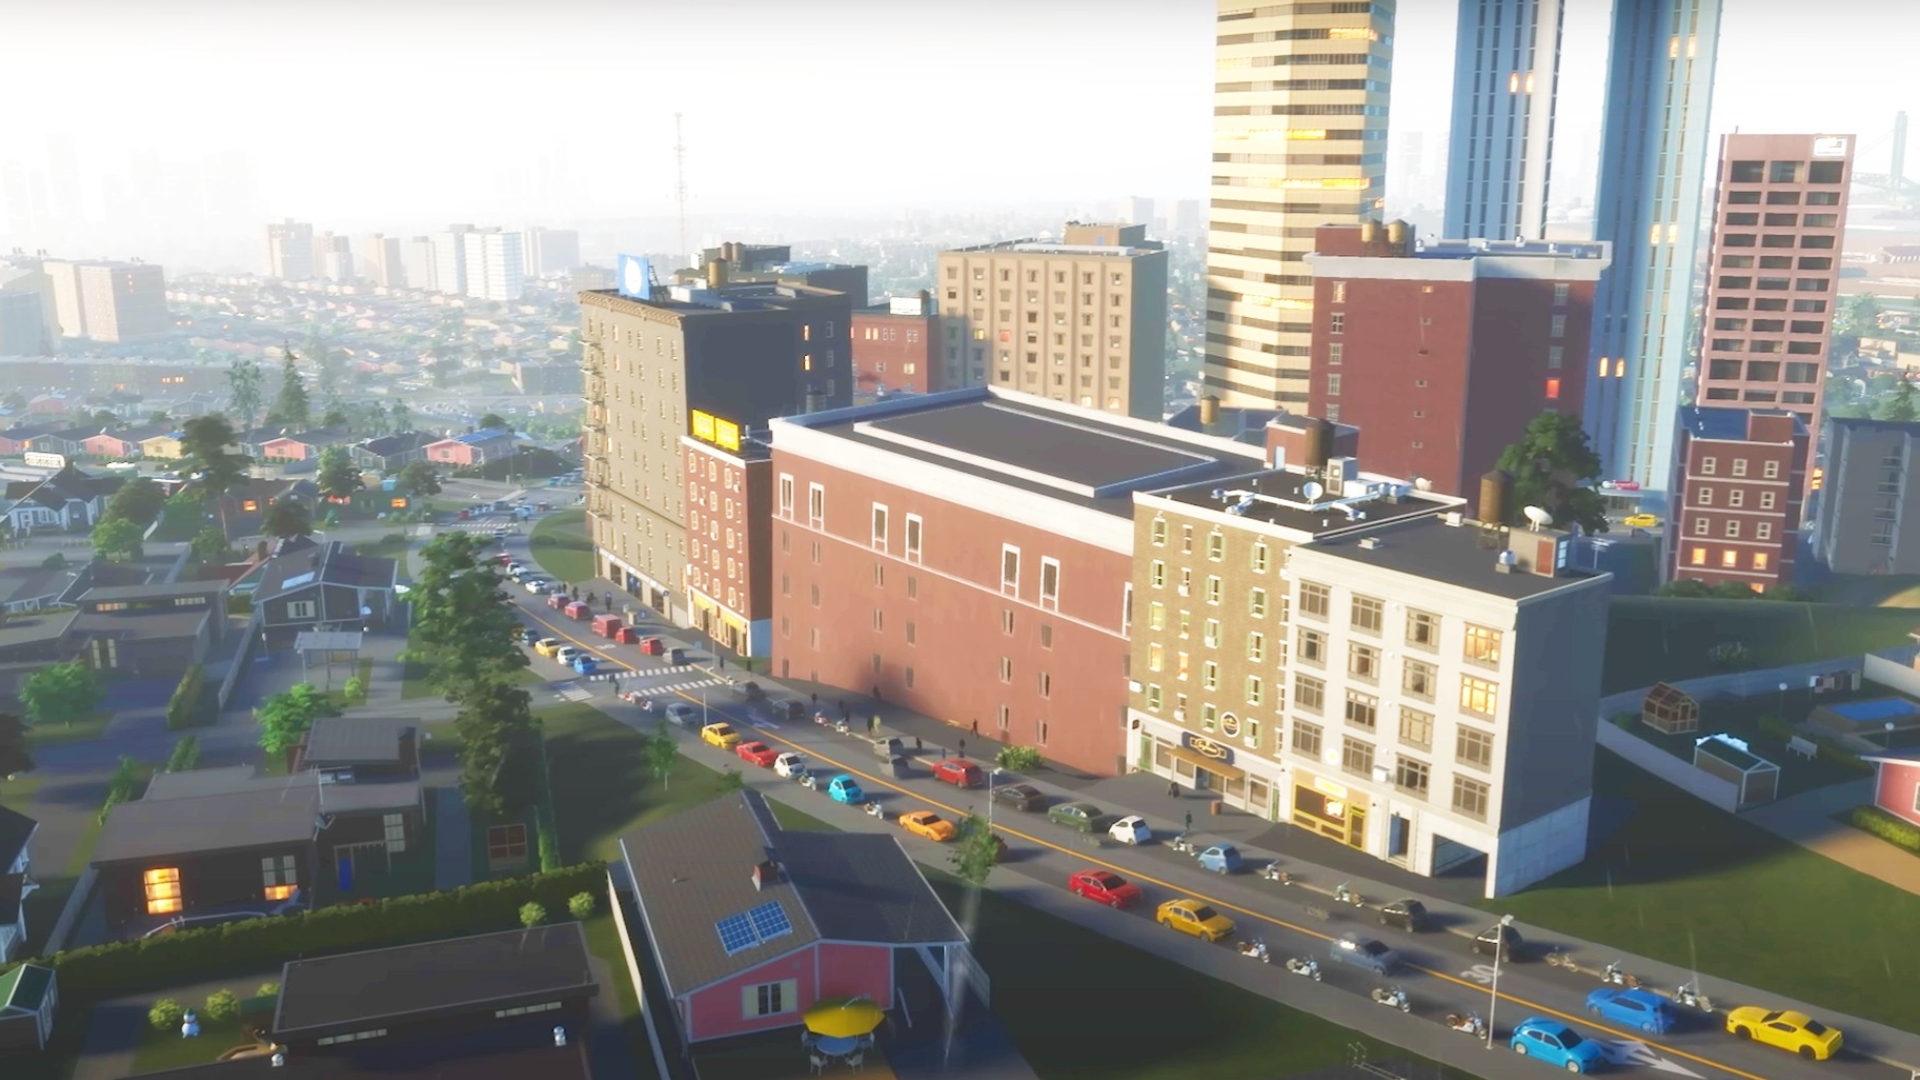 Cities Skylines 2 CEO tells some fans it “just might not be for you”